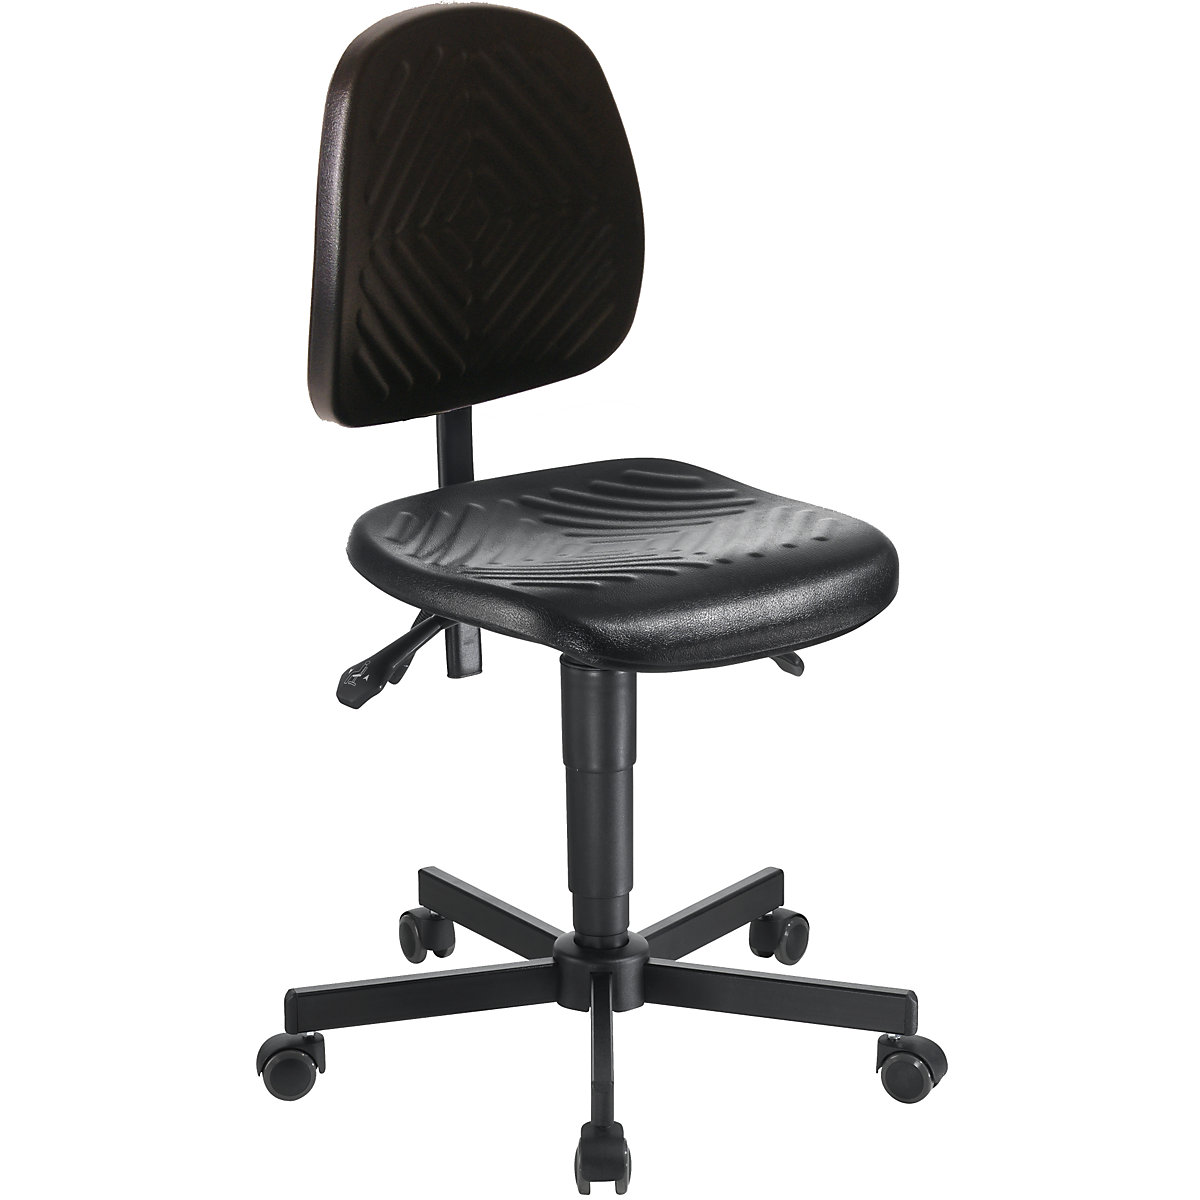 Industrial swivel chair, polyurethane upholstery, gas lift height adjustment - meychair